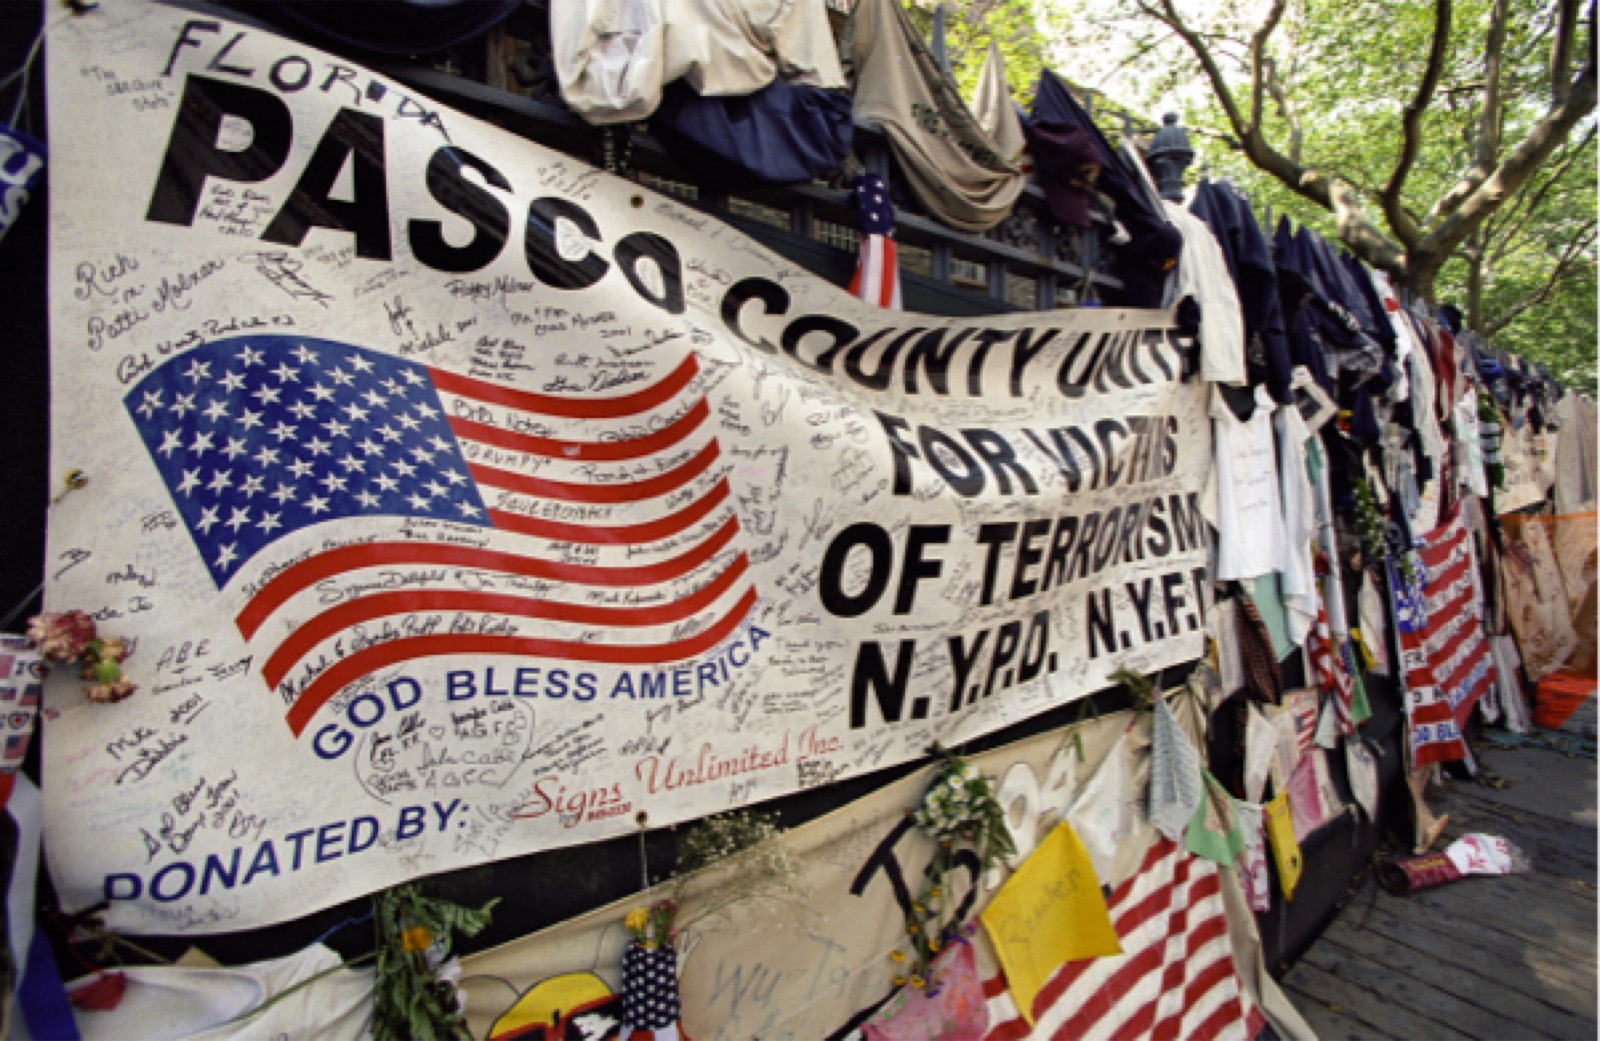 9/11 memorial with signatures and flags